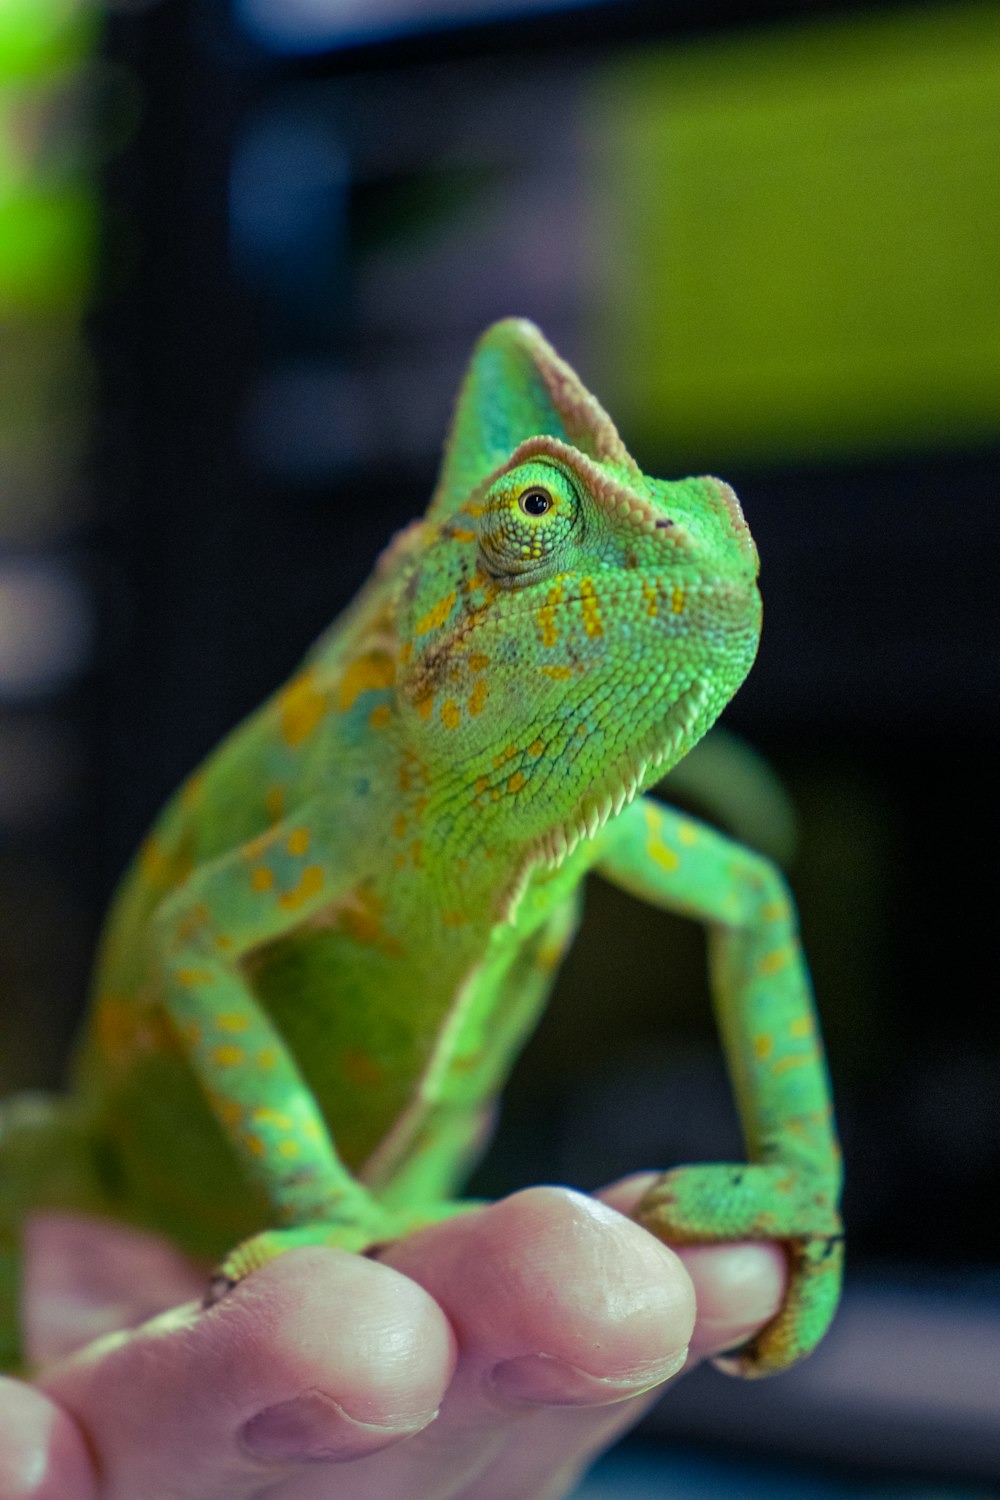 a person holding a small green lizard in their hand